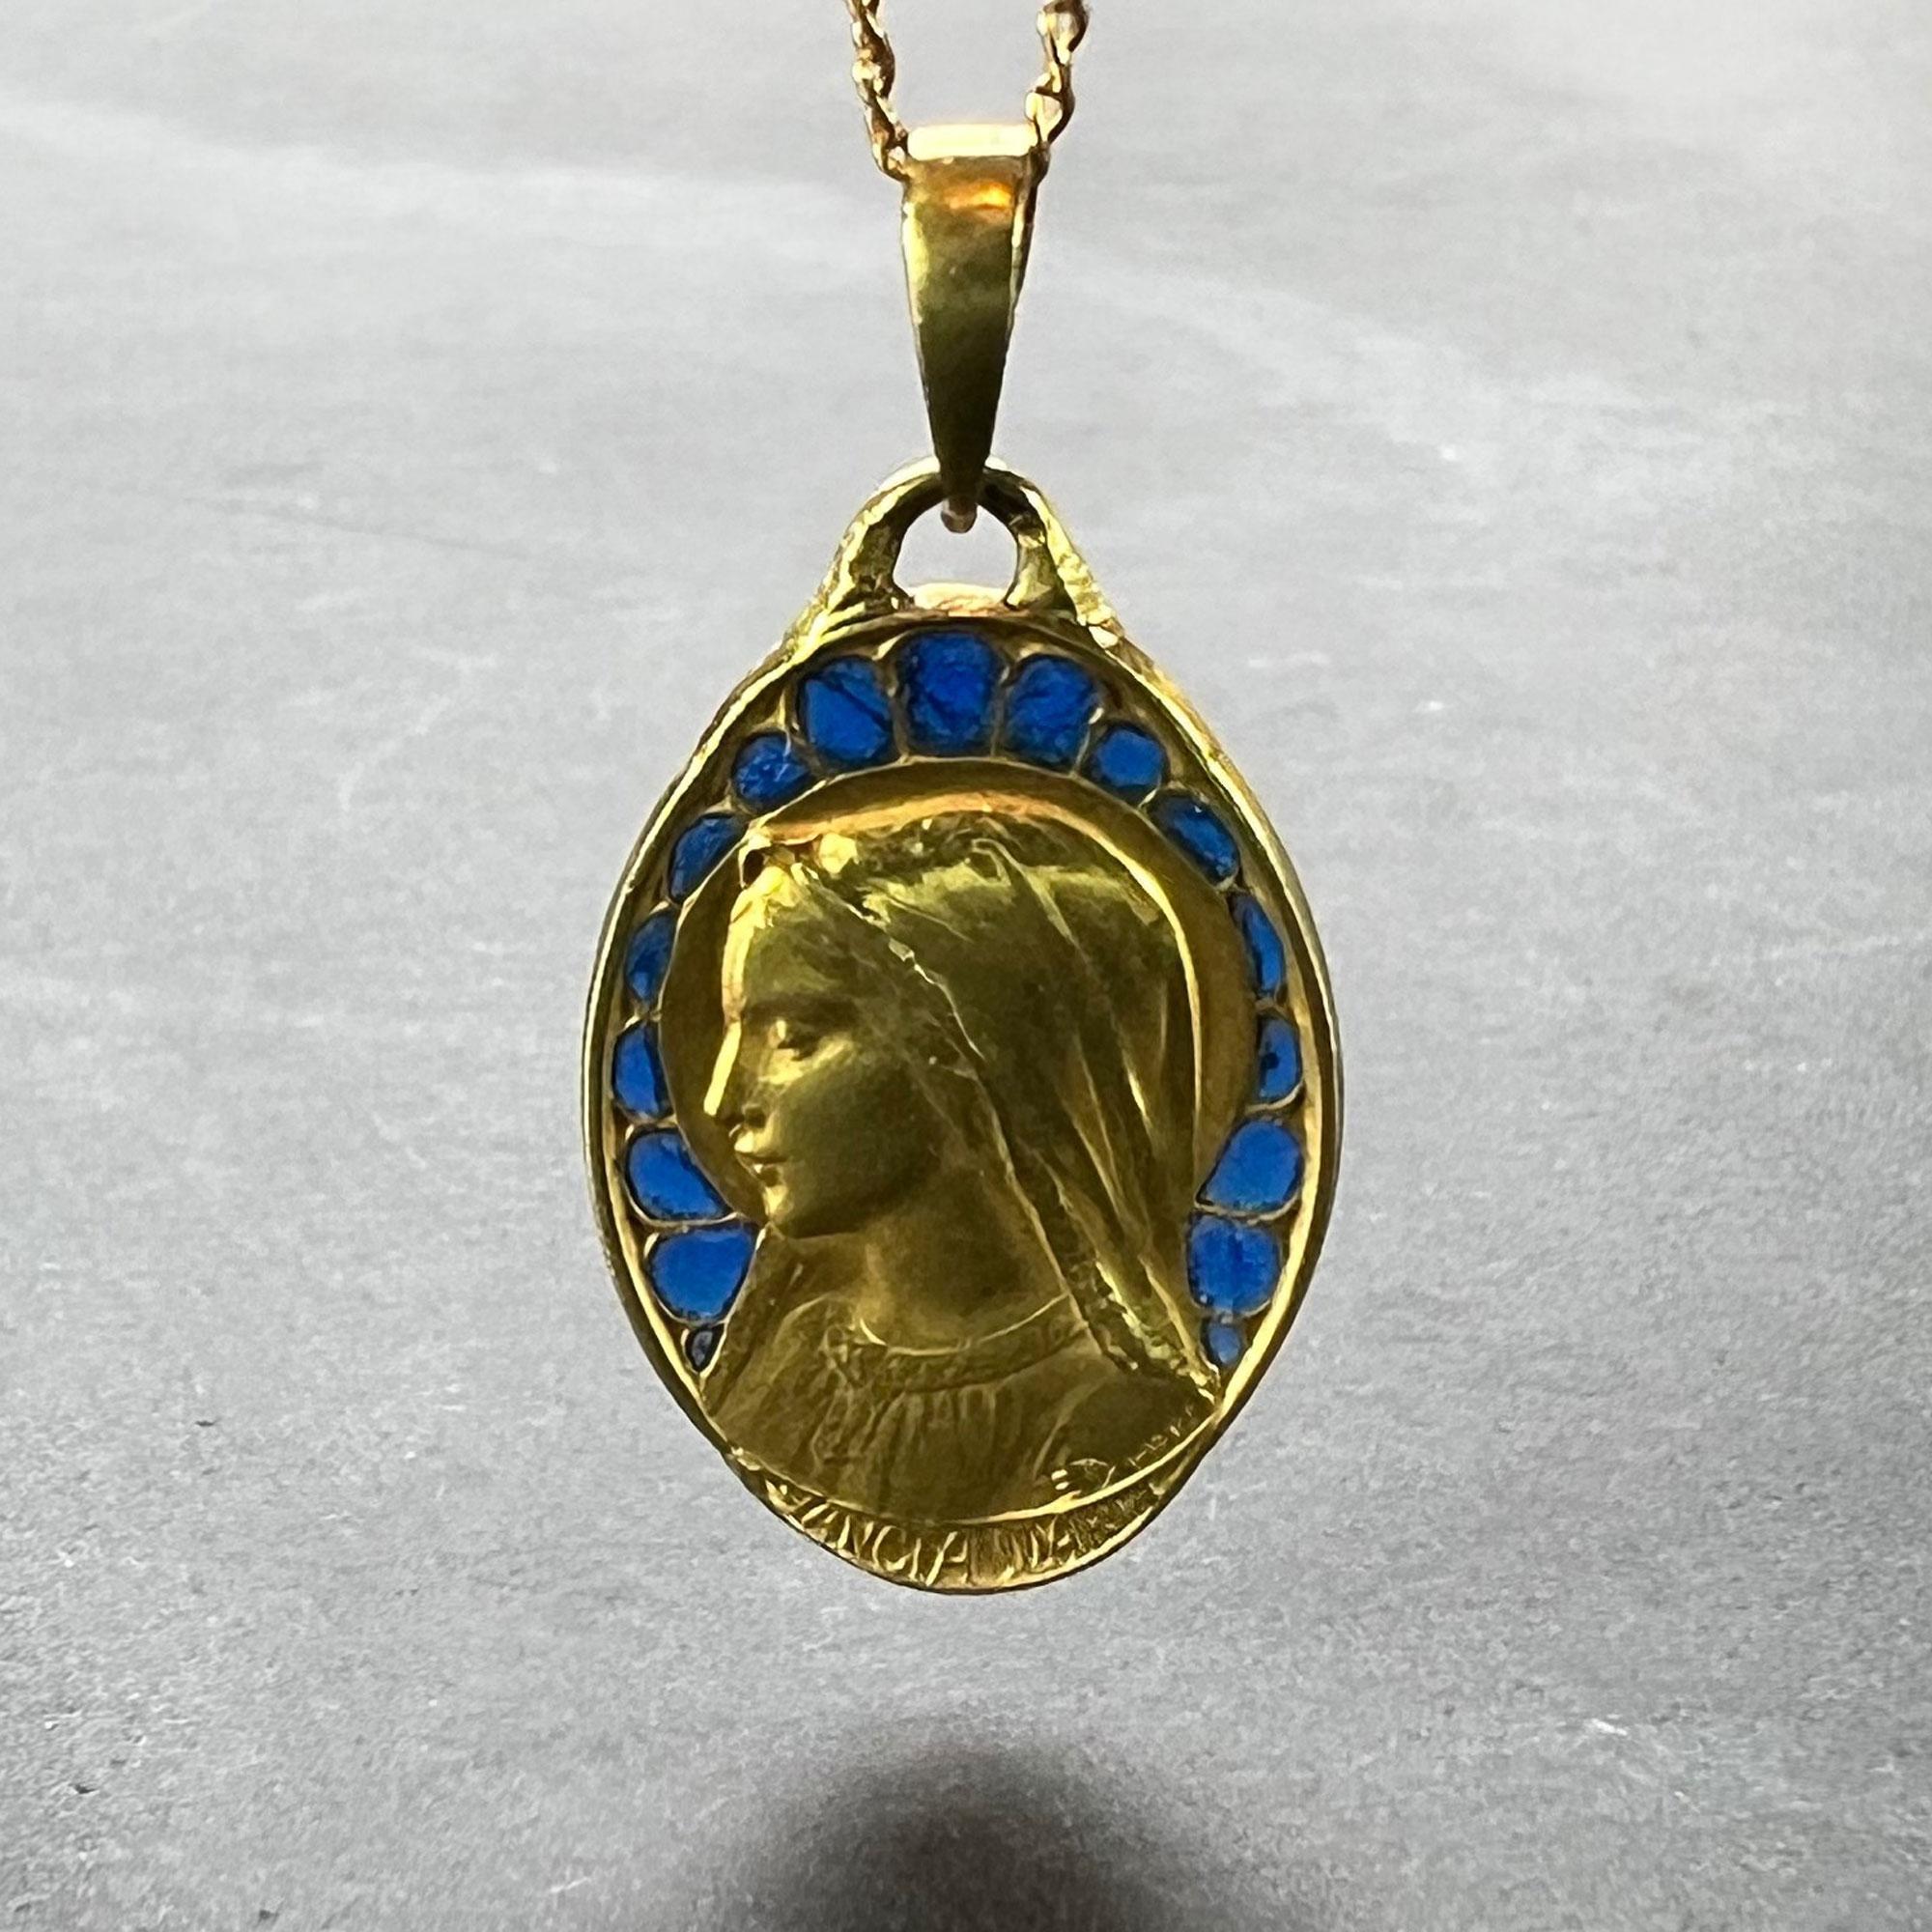 A French 18 karat (18K) yellow gold charm pendant designed as an oval medal depicting the Virgin Mary with plique a jour blue enamel surround, over the words 'SANCTA MARIA'. Signed E Dropsy, stamped with the eagle’s head for 18 karat gold and French